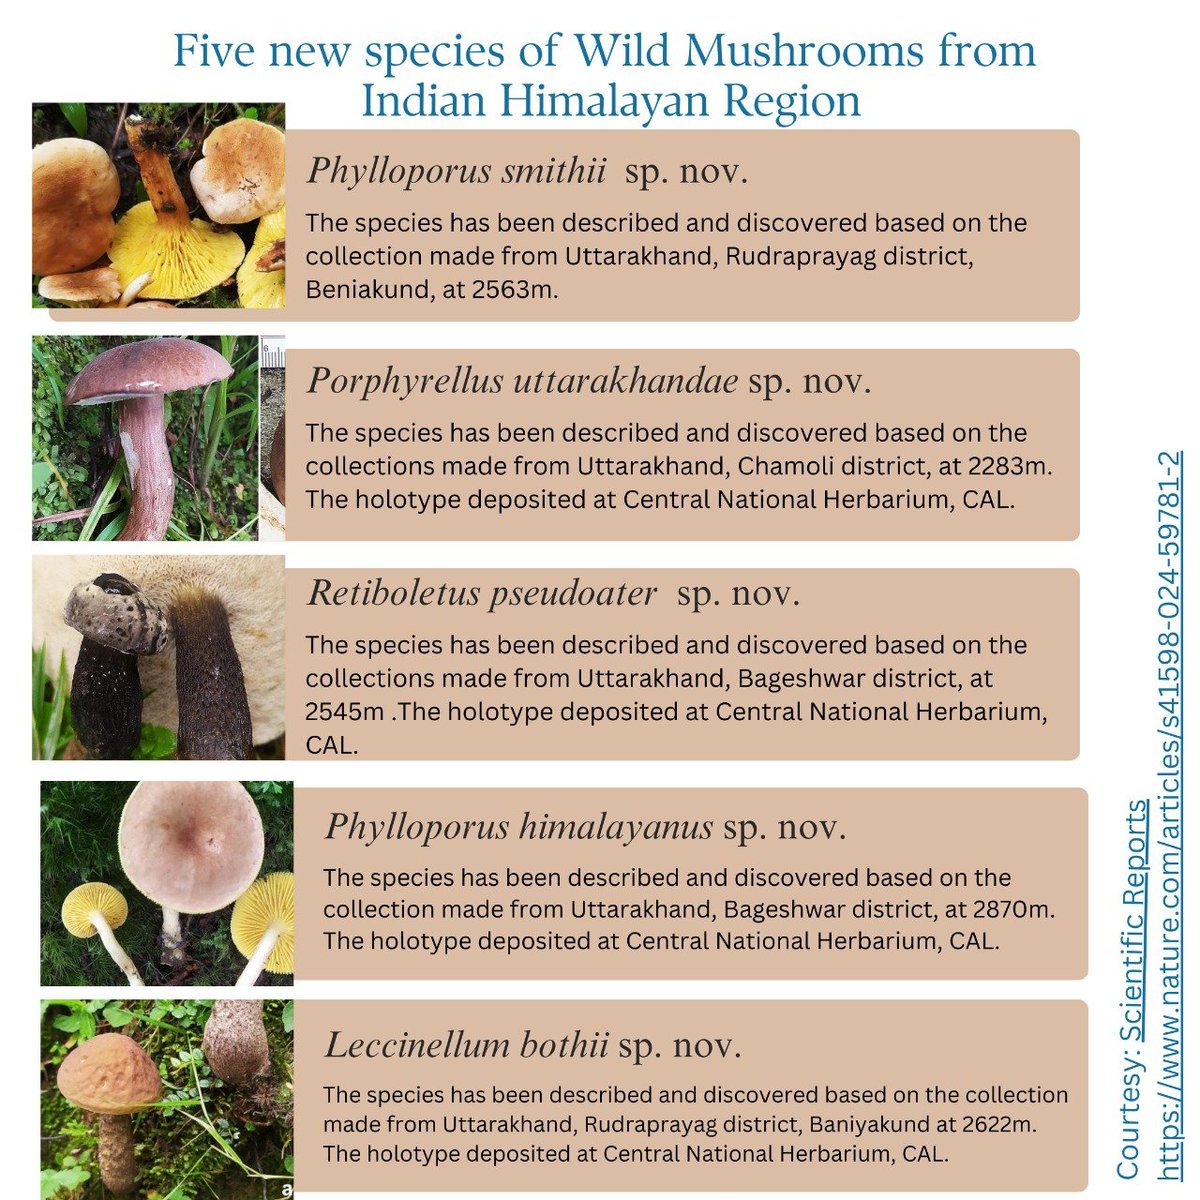 A team of scientists led by Dr Kanad Das, Scientist-F @bsi_moefcc #CNH #Howrah, and international collaborations discovered and described five new species of wild mushrooms from Uttarakhand recently. #IncredibleIndia